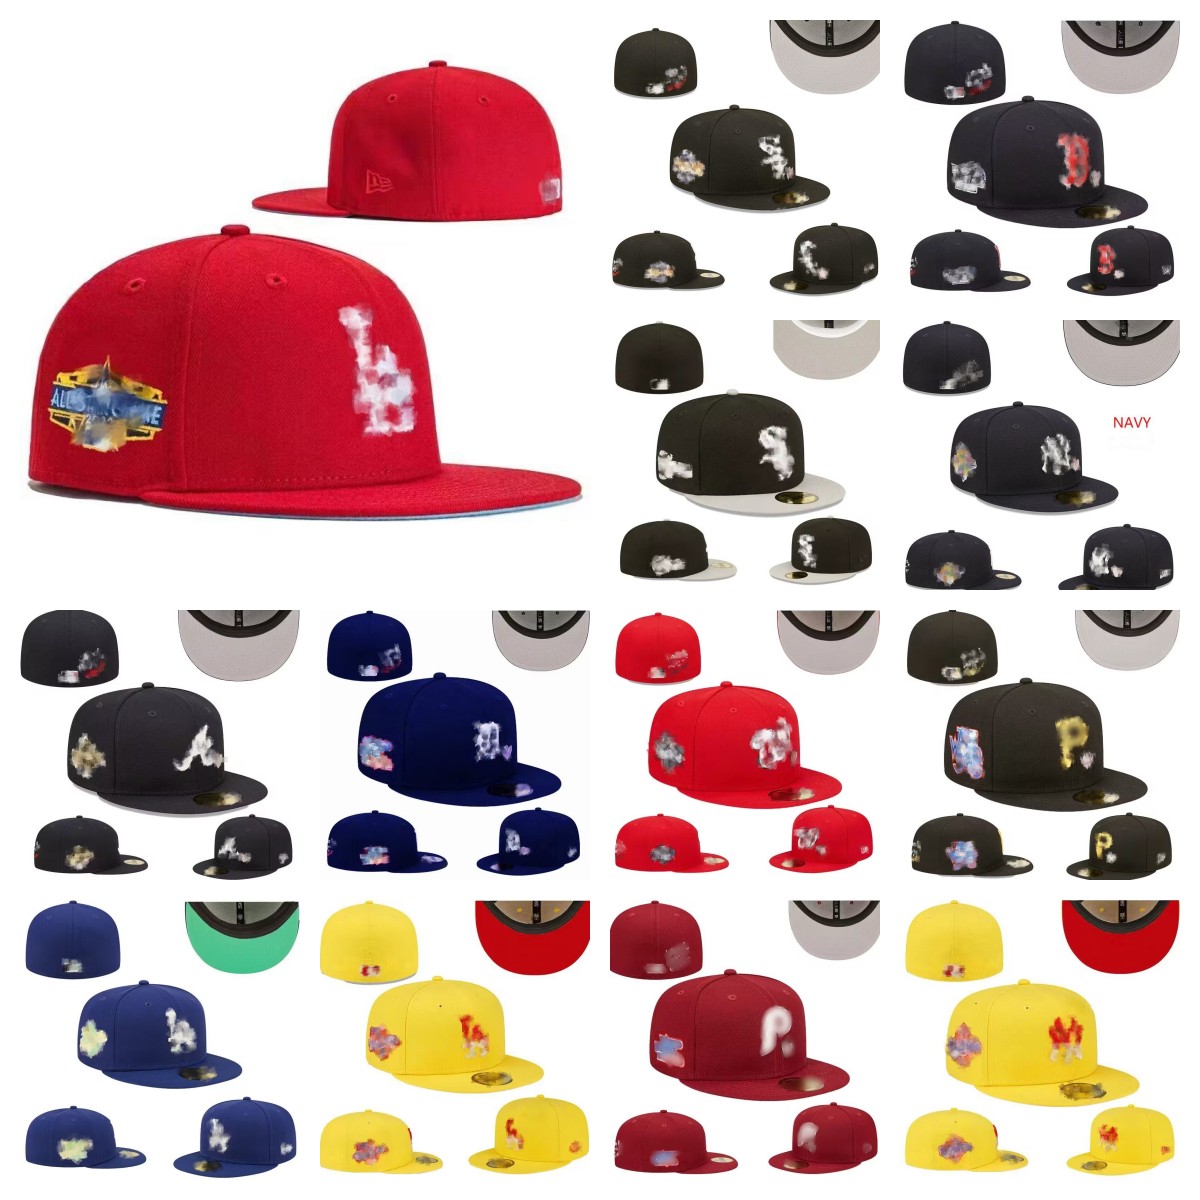 

2023 Fitted hats Snapbacks hat Adjustable baskball Caps All Team Logo Outdoor Sports chrome heart Embroidery Cotton flat Closed Beanies alo hat flex sun cap sizes 7-8, 7 5/8